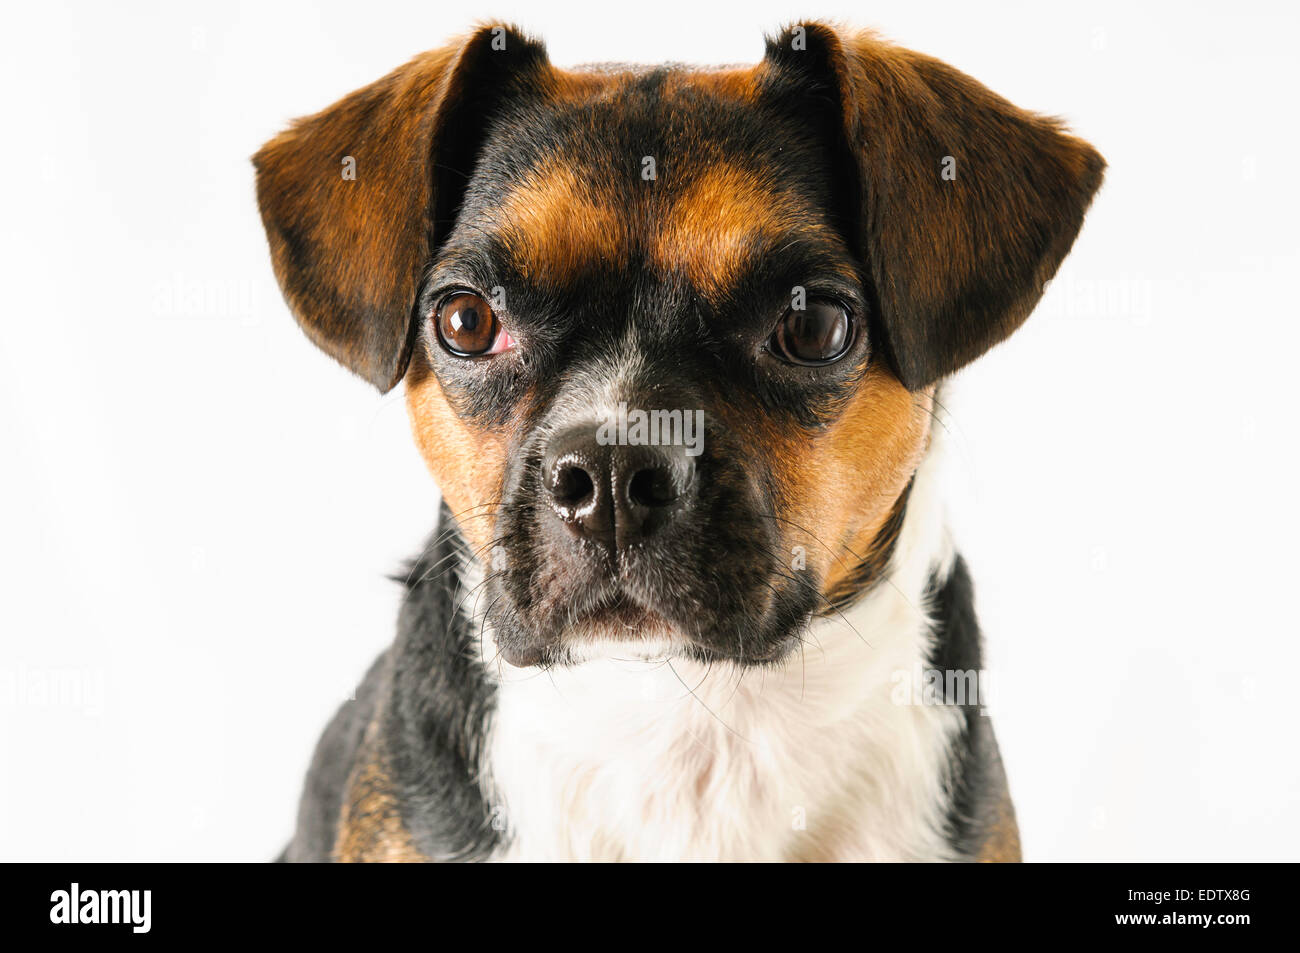 Brown And White Beagle And Boston Terrier Mixed Breed Dog On White Stock Photo Alamy